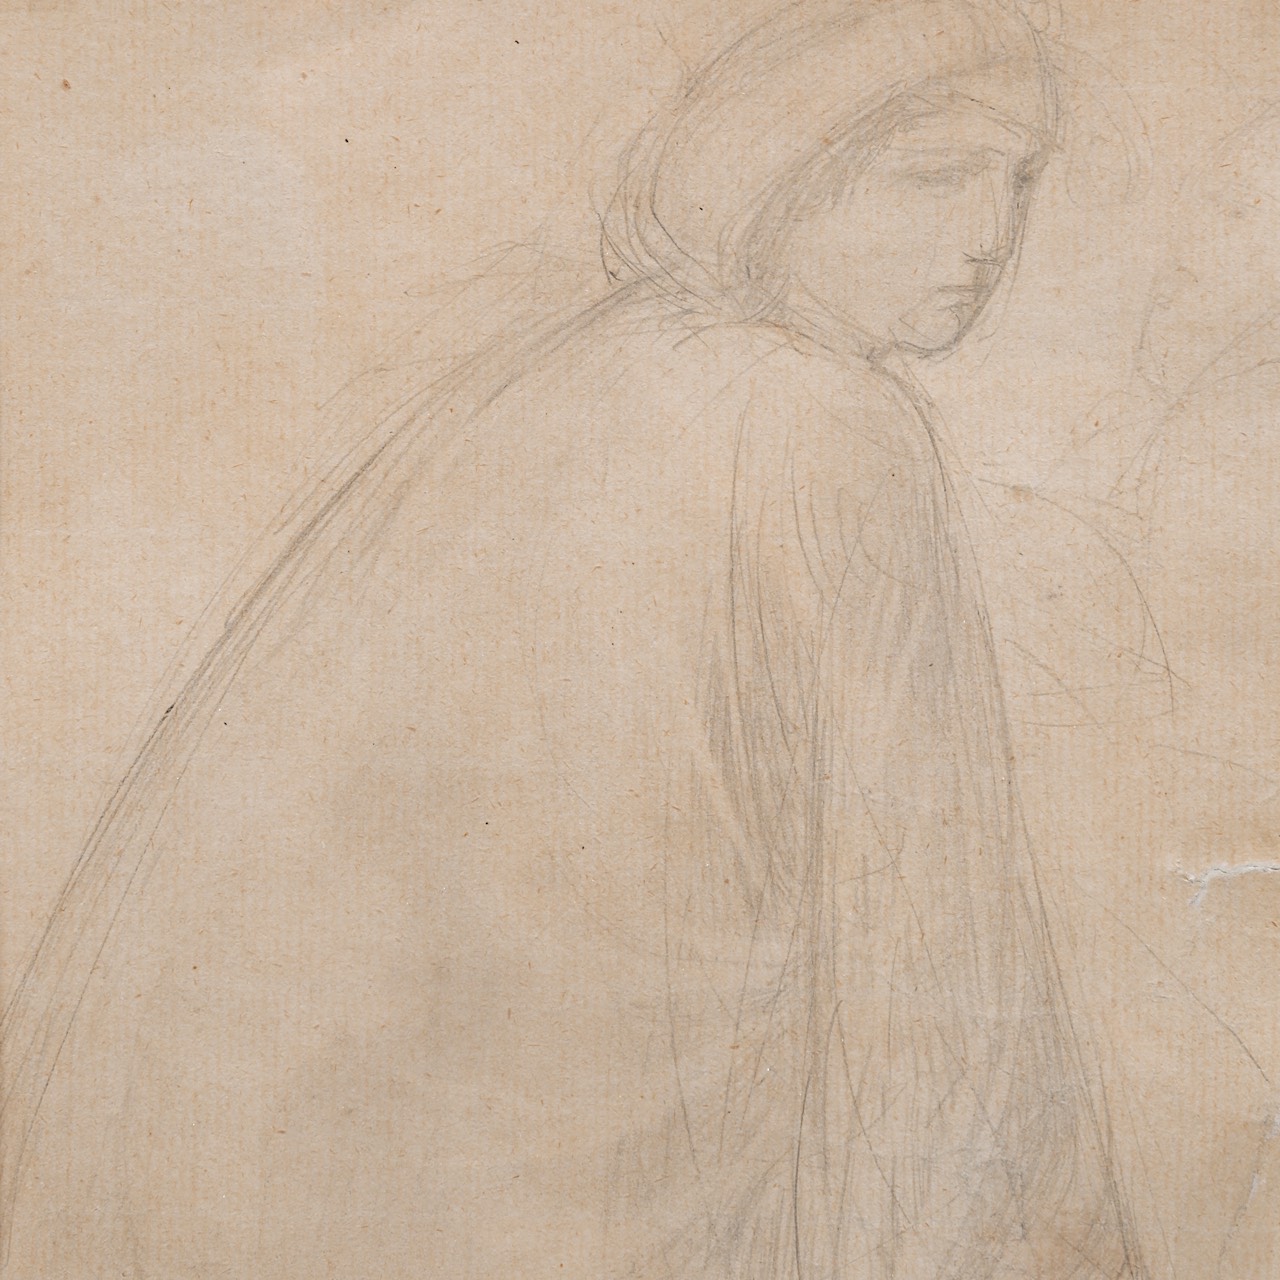 George Minne (1866-1941), study drawing, 1915, pencil on paper 23 x 17.5 cm. (9.0 x 6.8 in.), Frame: - Image 4 of 5